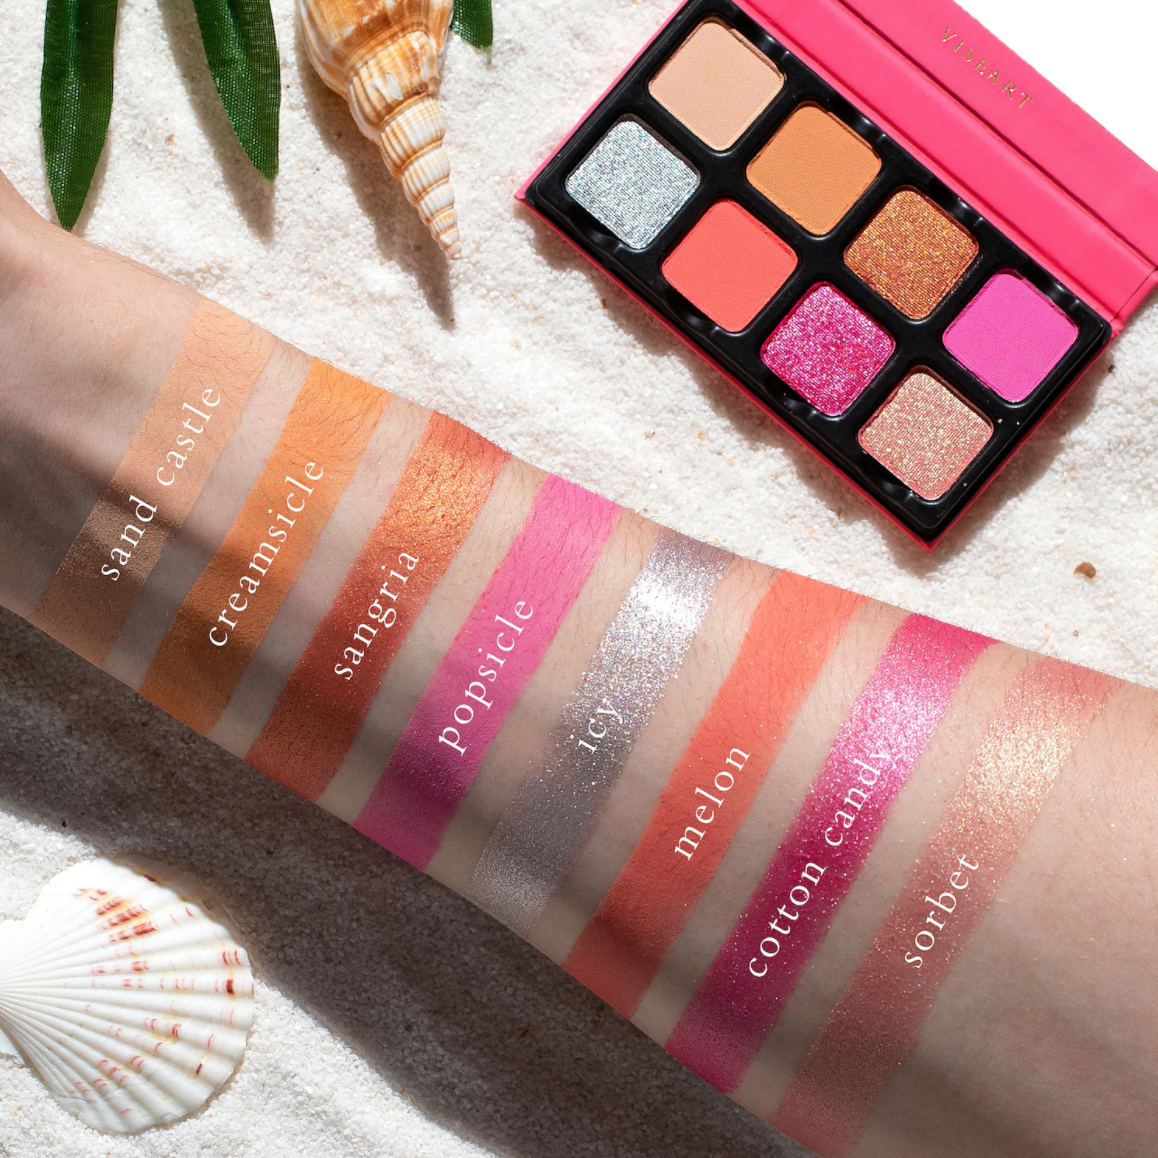 April Shop My Stash - Bright Spring Look and Duping The Vibes of The Viseart Mini Petit Pro Chou Chou Palette